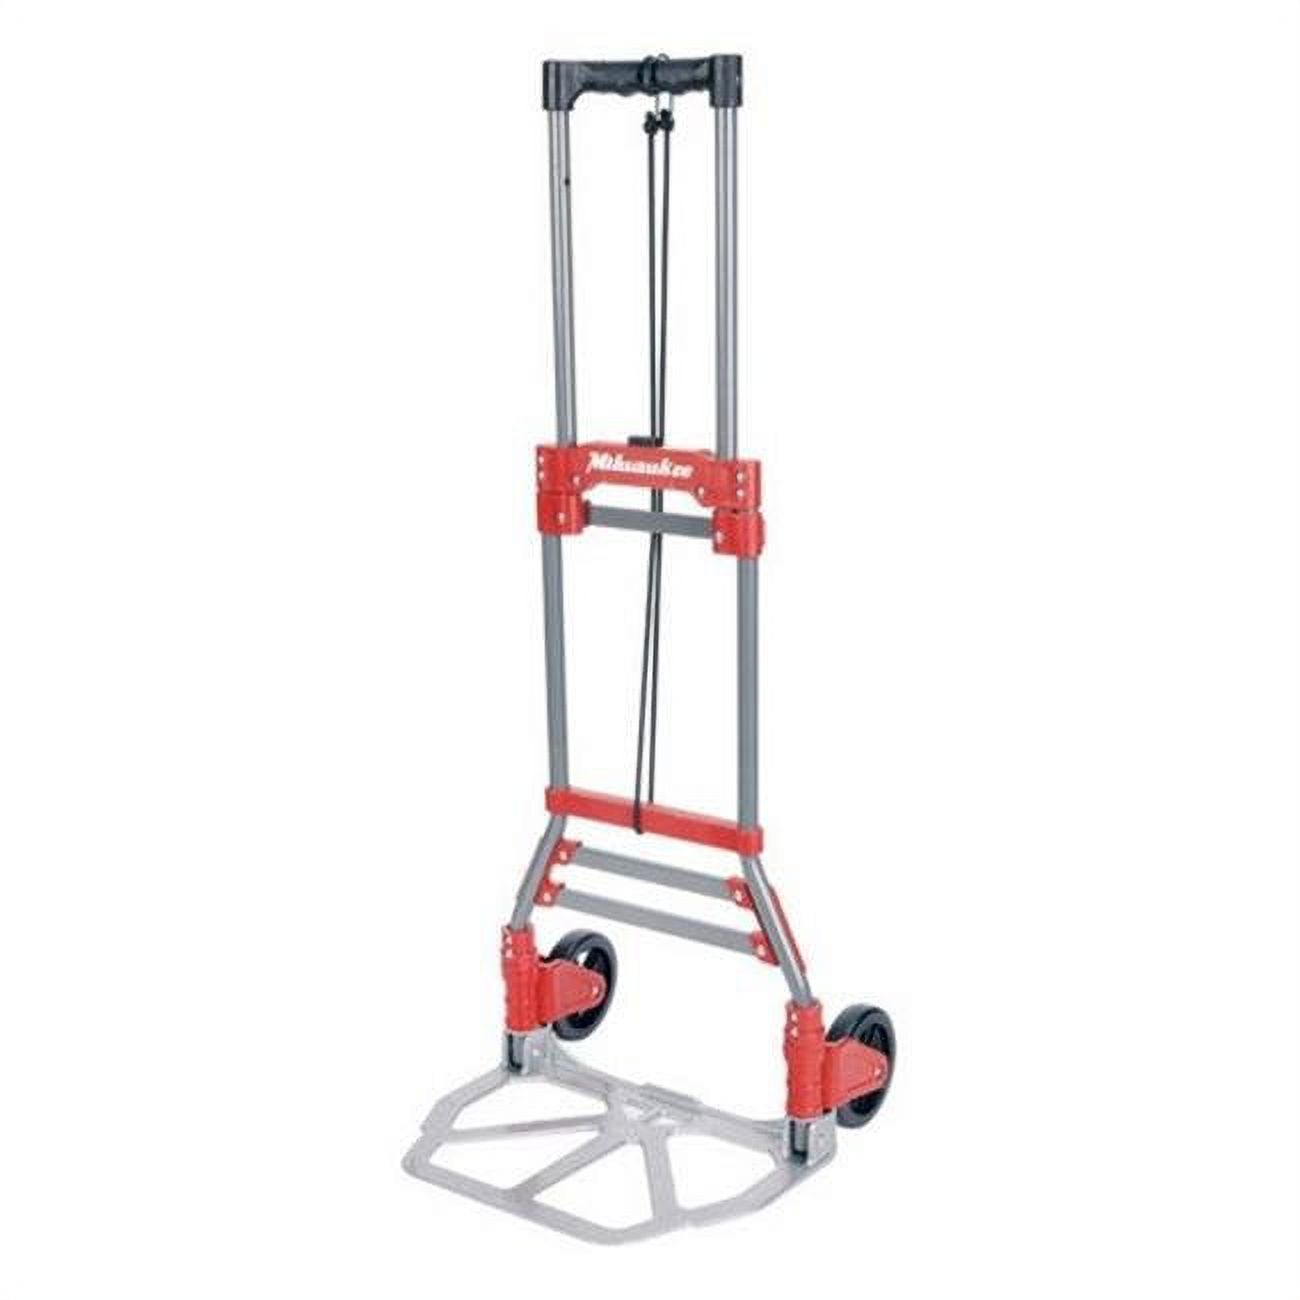 Milwaukee Hand Truck 33888 150 lbs Cap Fold Up Hand Truck Pushbutton - image 1 of 1